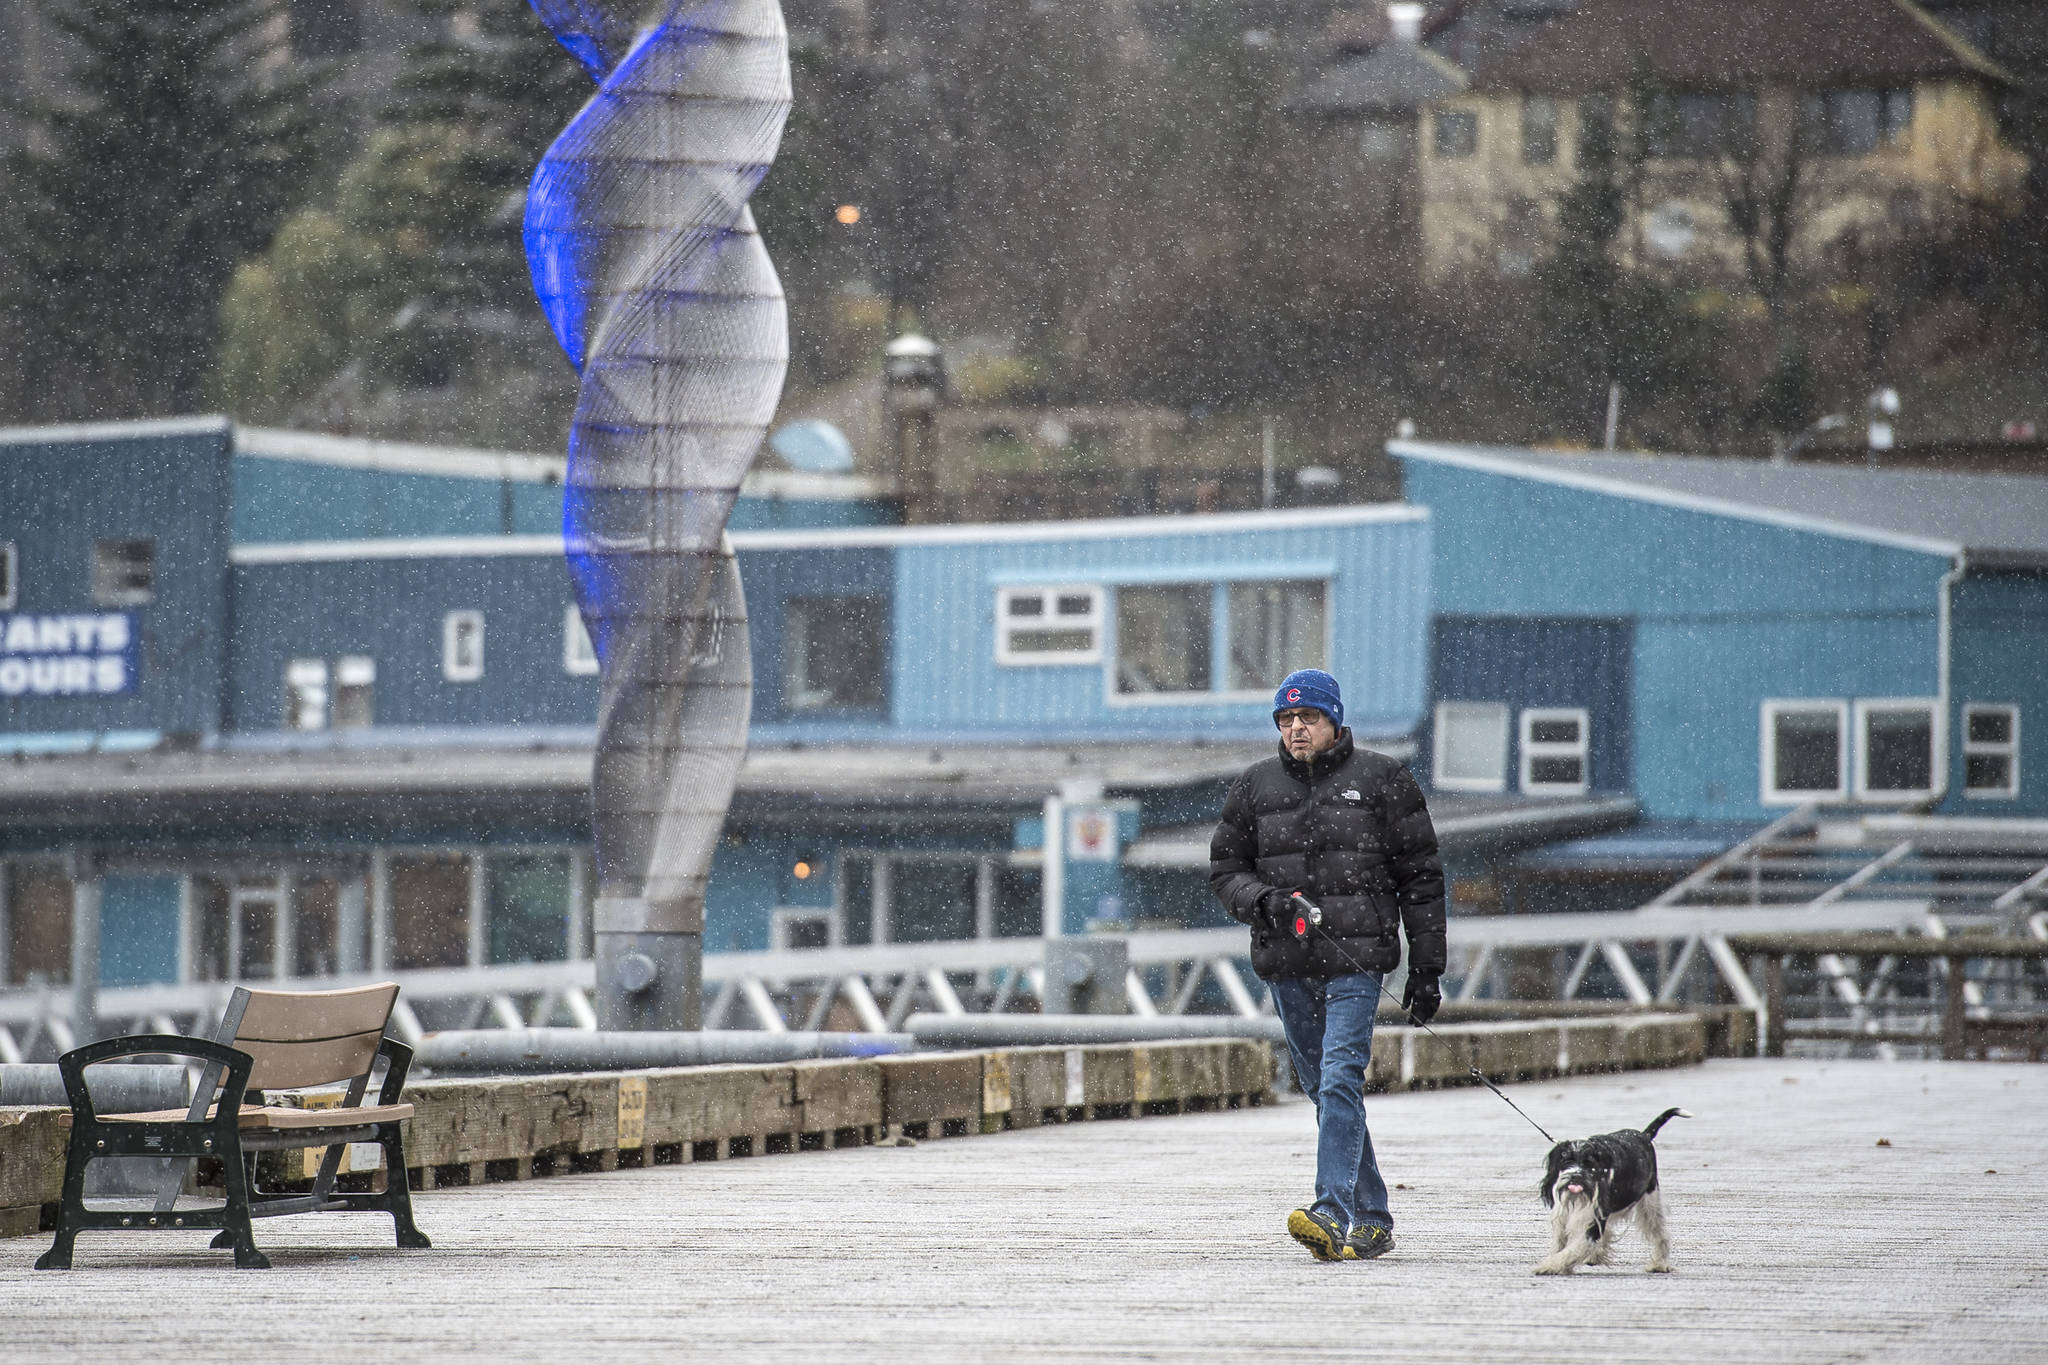 Trace snowfall hits Juneau, more expected Thursday evening